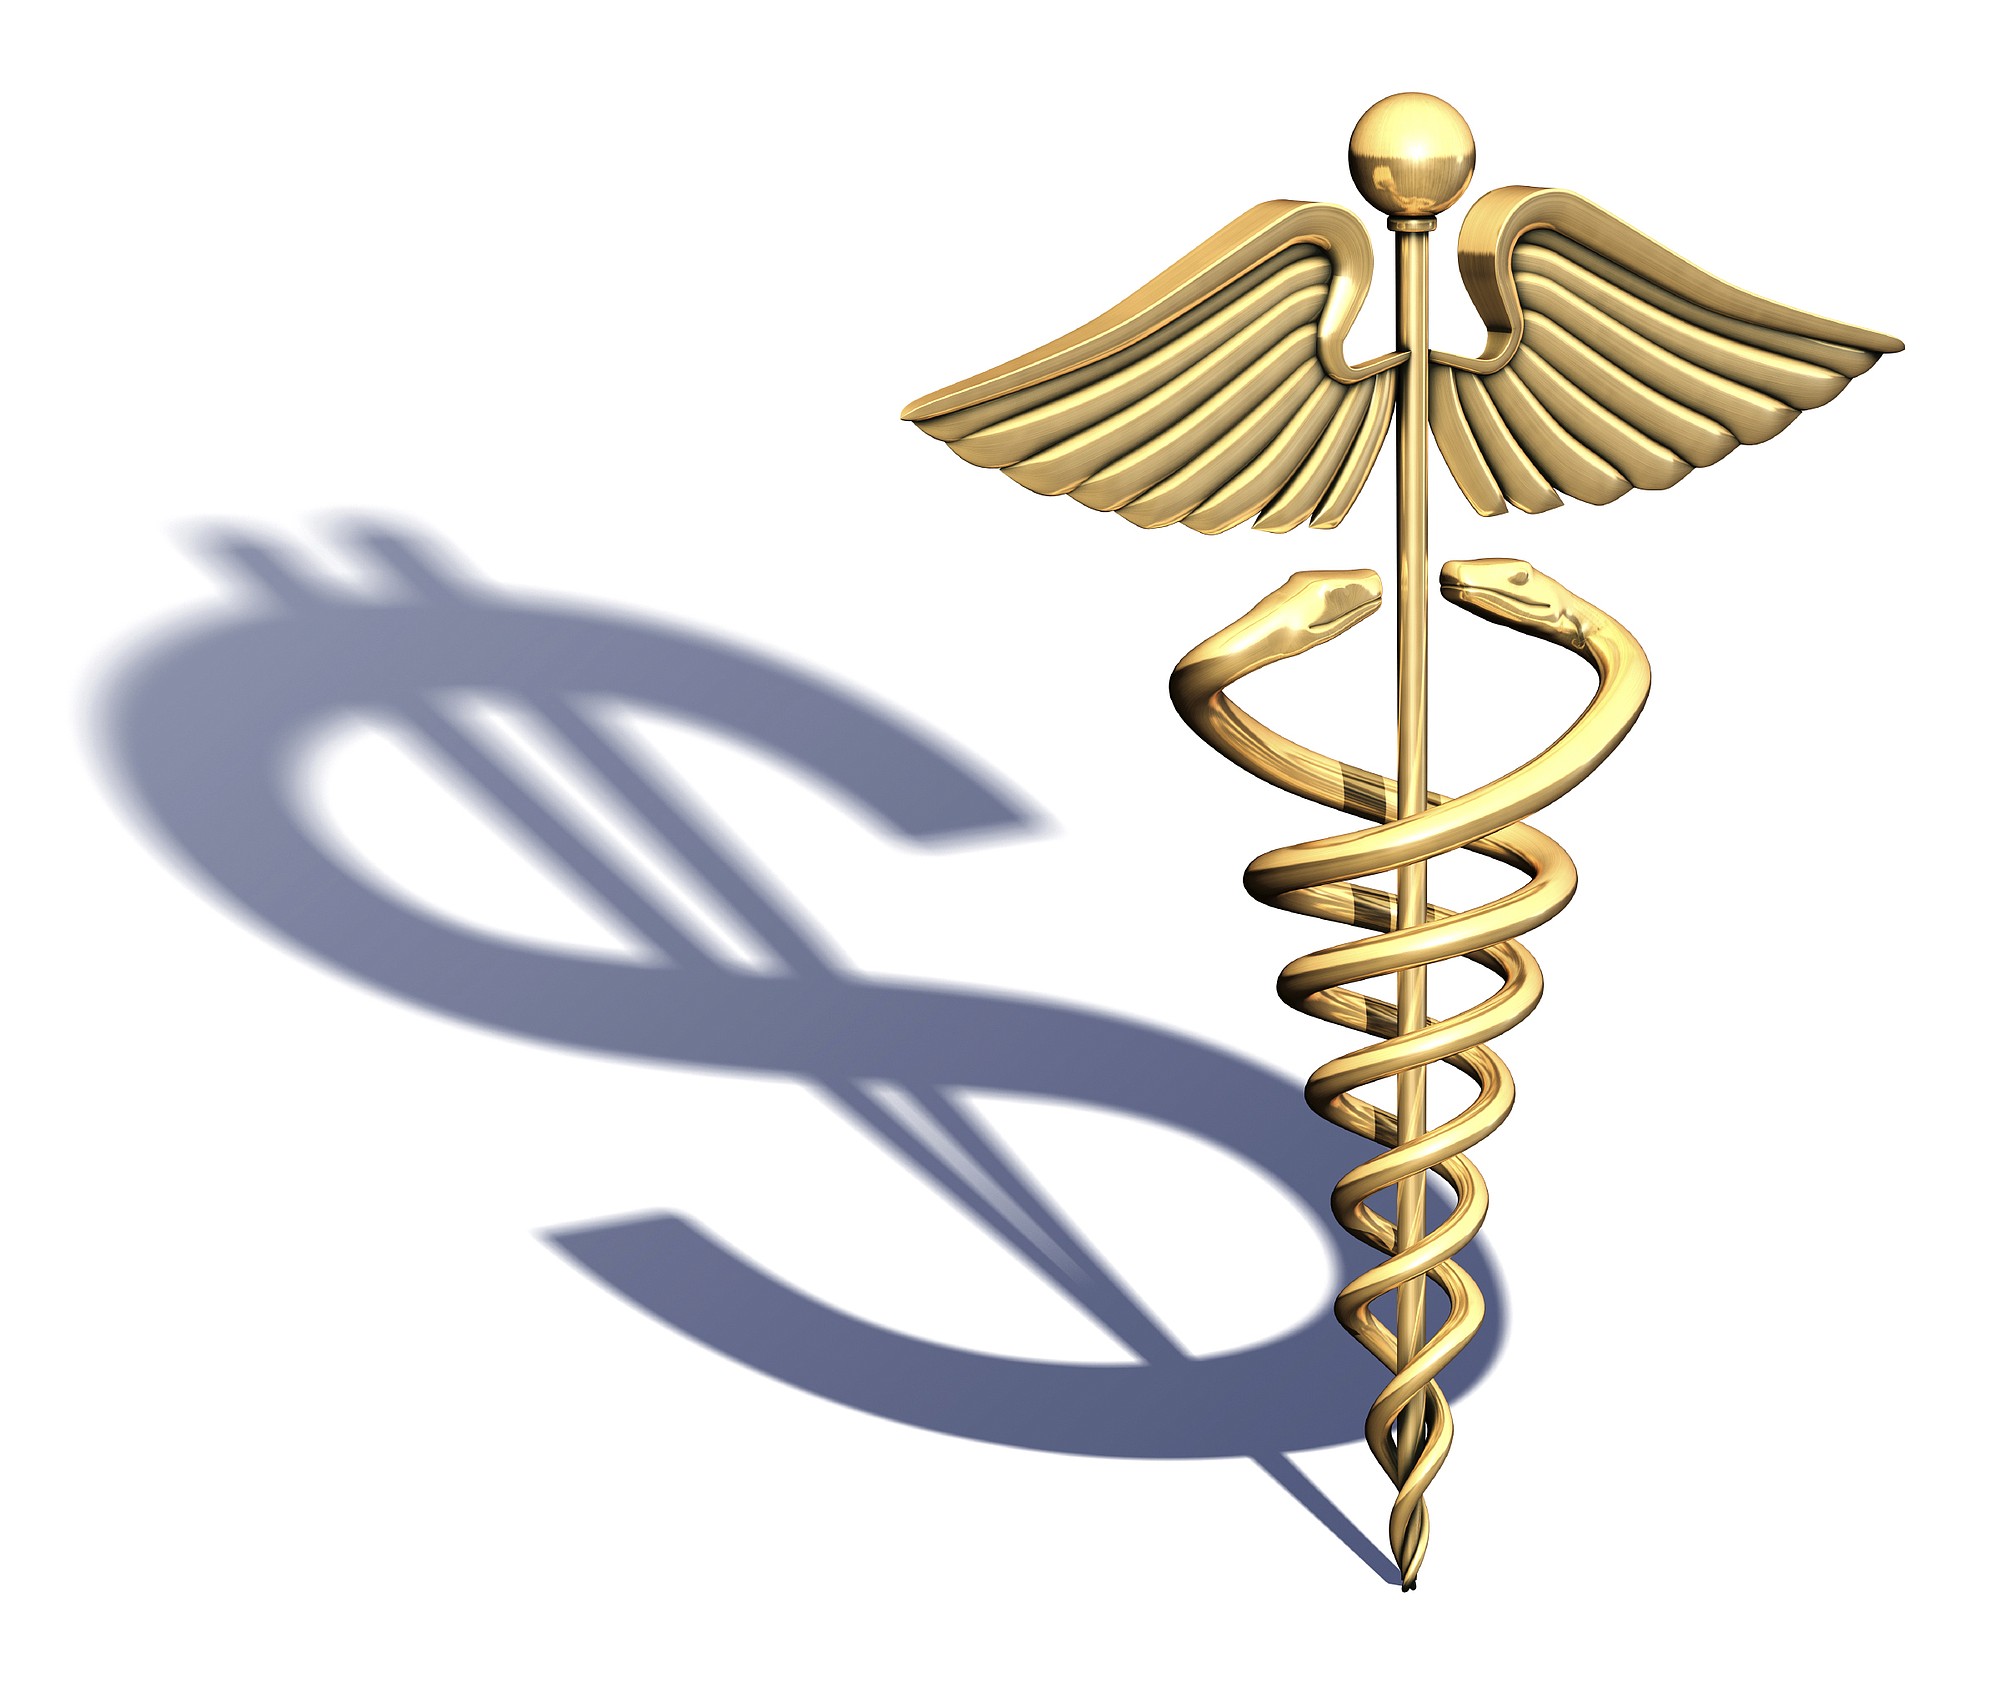 Gold caduceus casting a shadow of a dollar on a white background